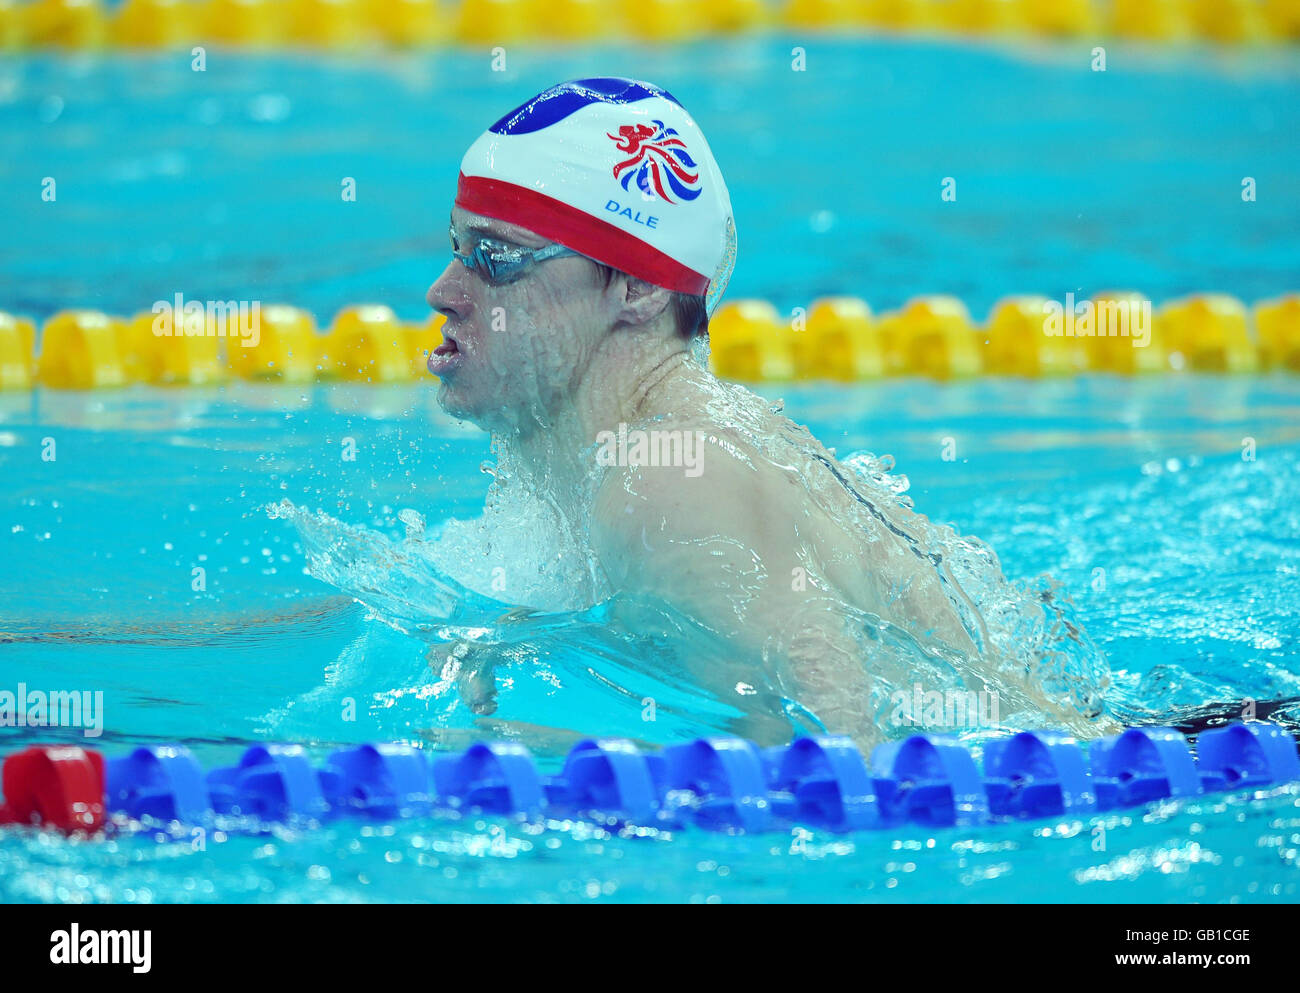 Great Britain's Euan Dale in action in the Men's 400m Individual Medley at the National Aquatic Center in Beijing, China. Stock Photo